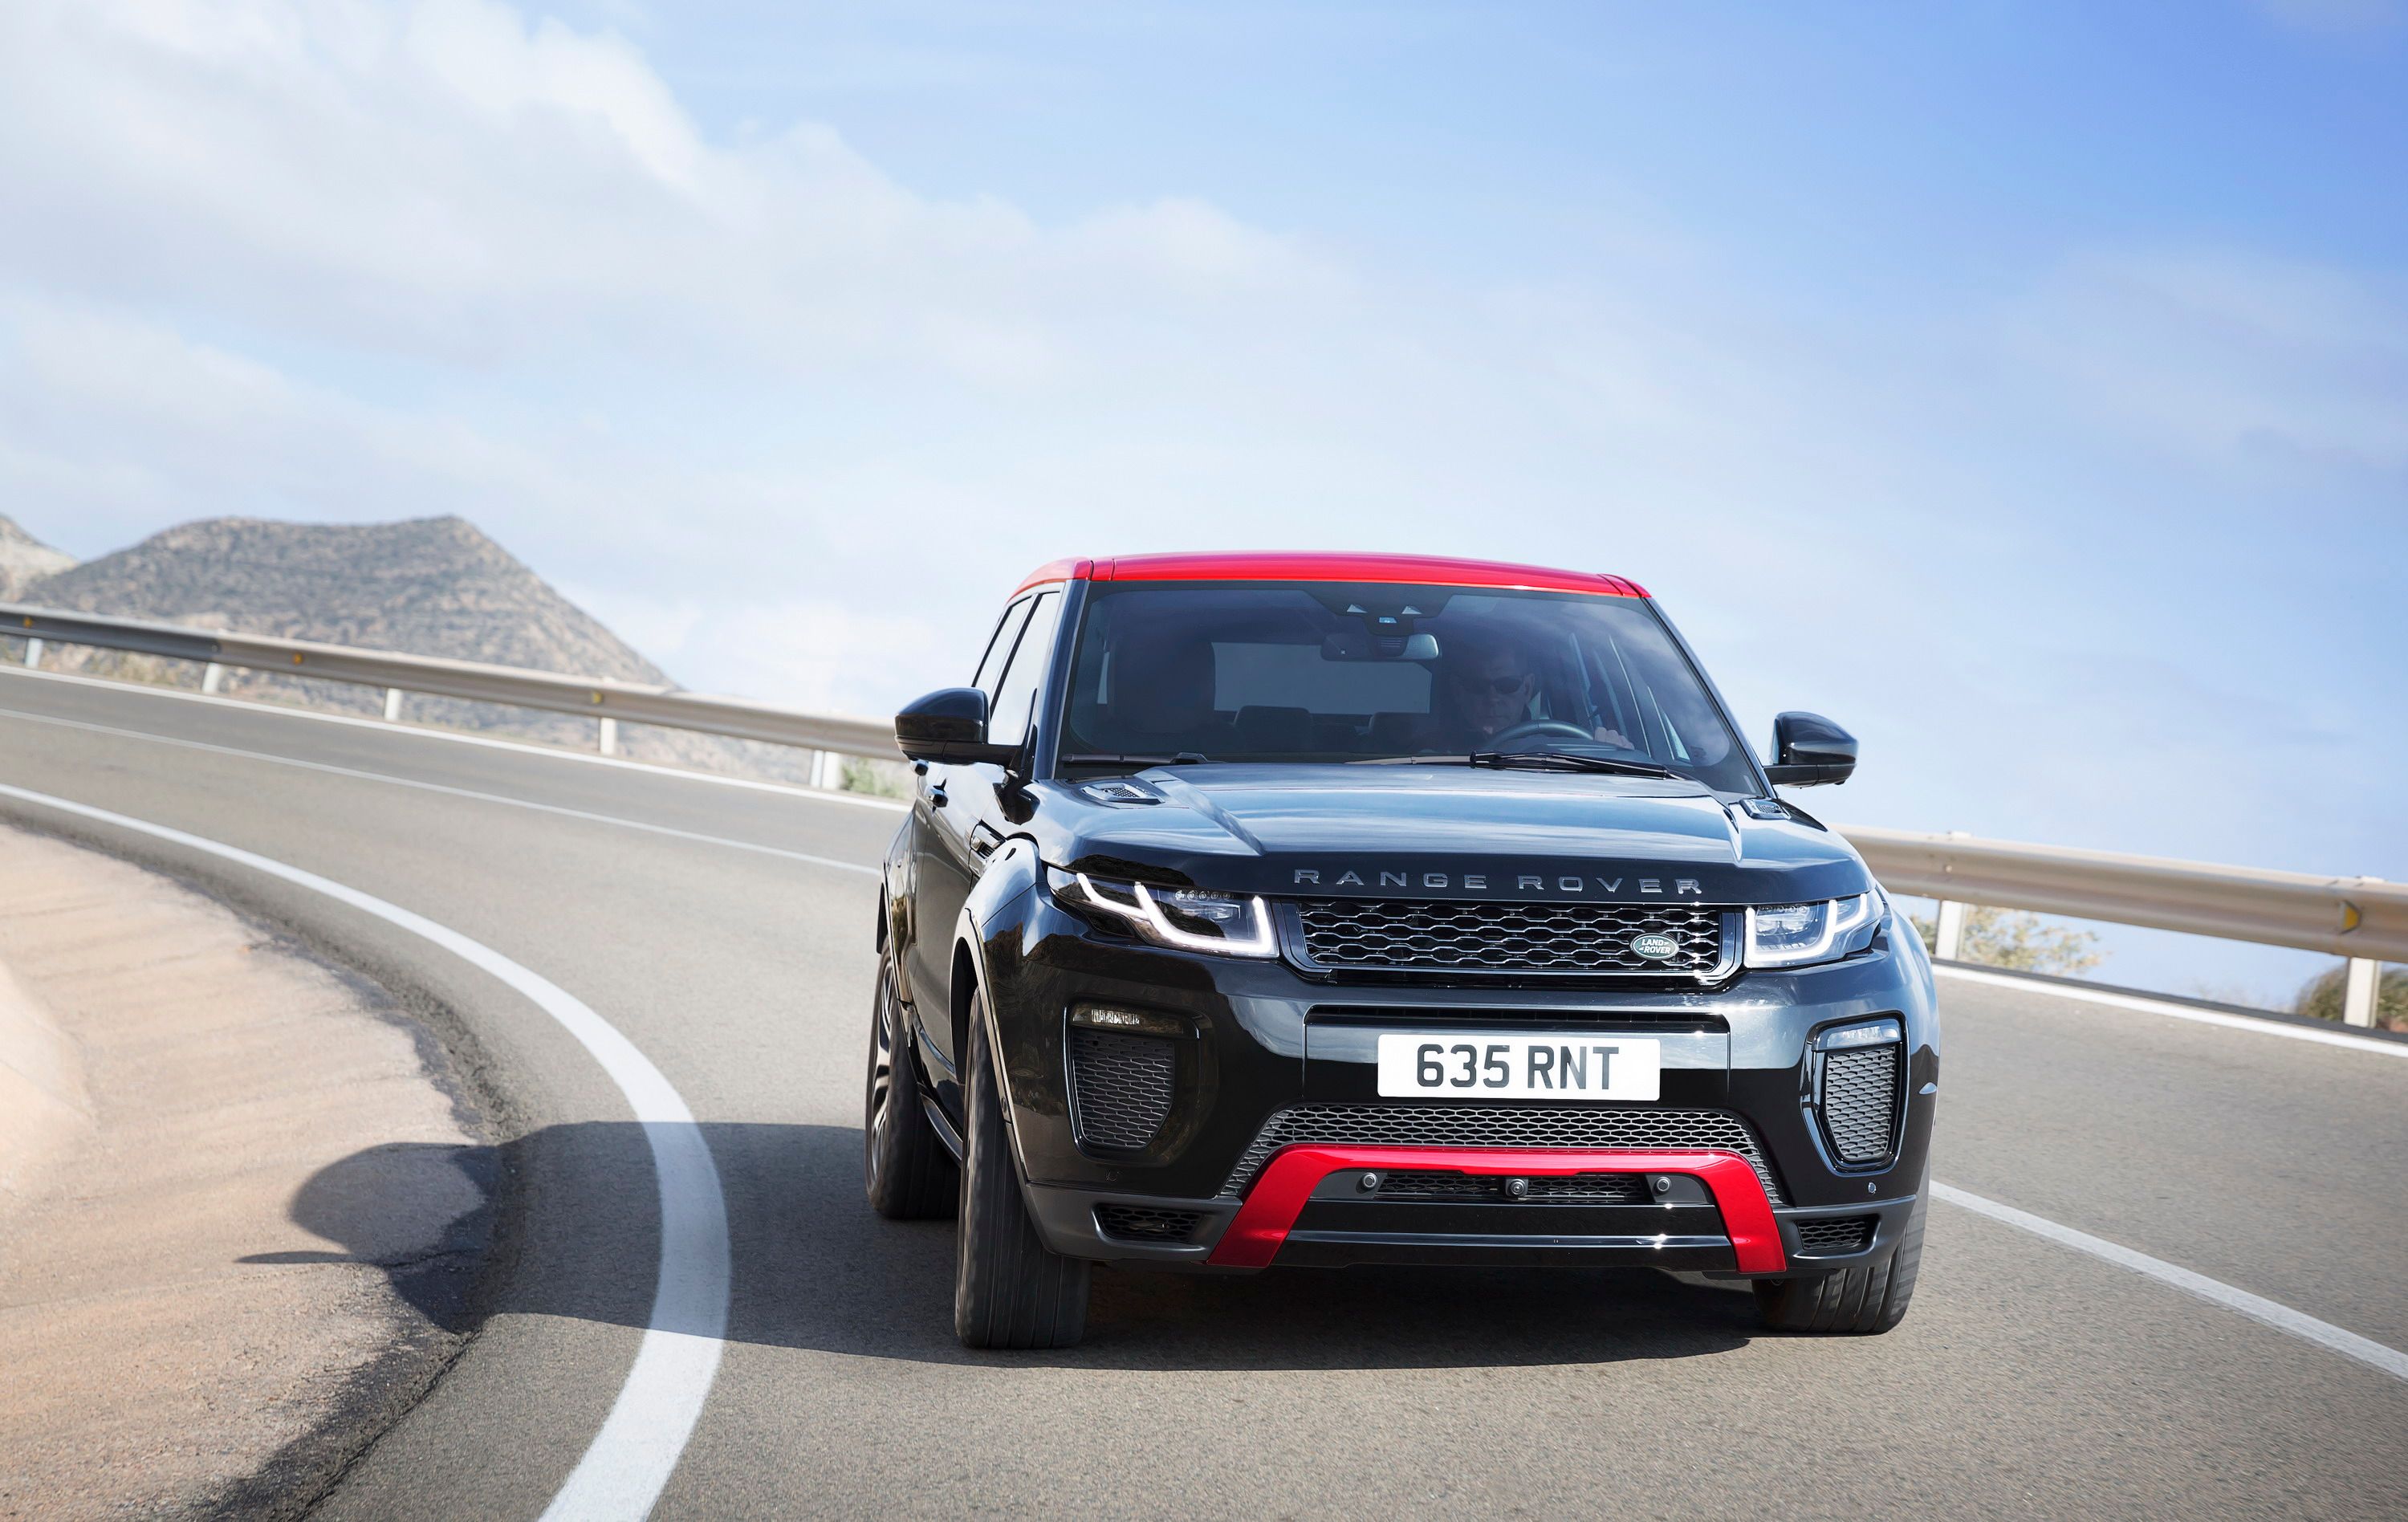 2017 Land Rover Range Rover Evoque Ember Limited Edition